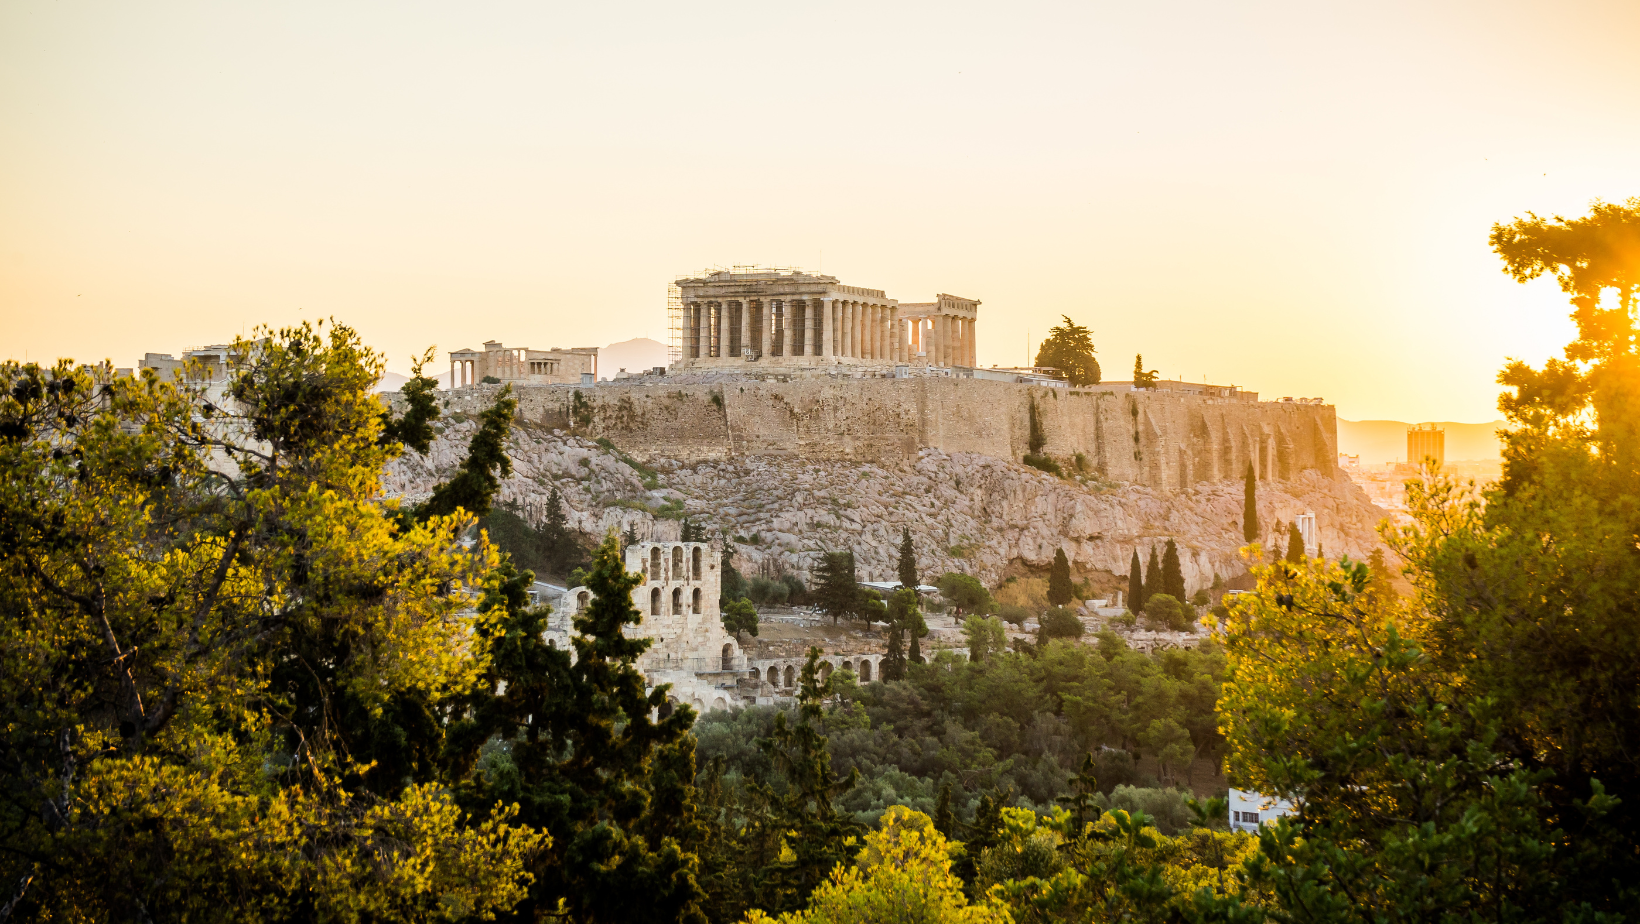 The Acropolis hill in Athens